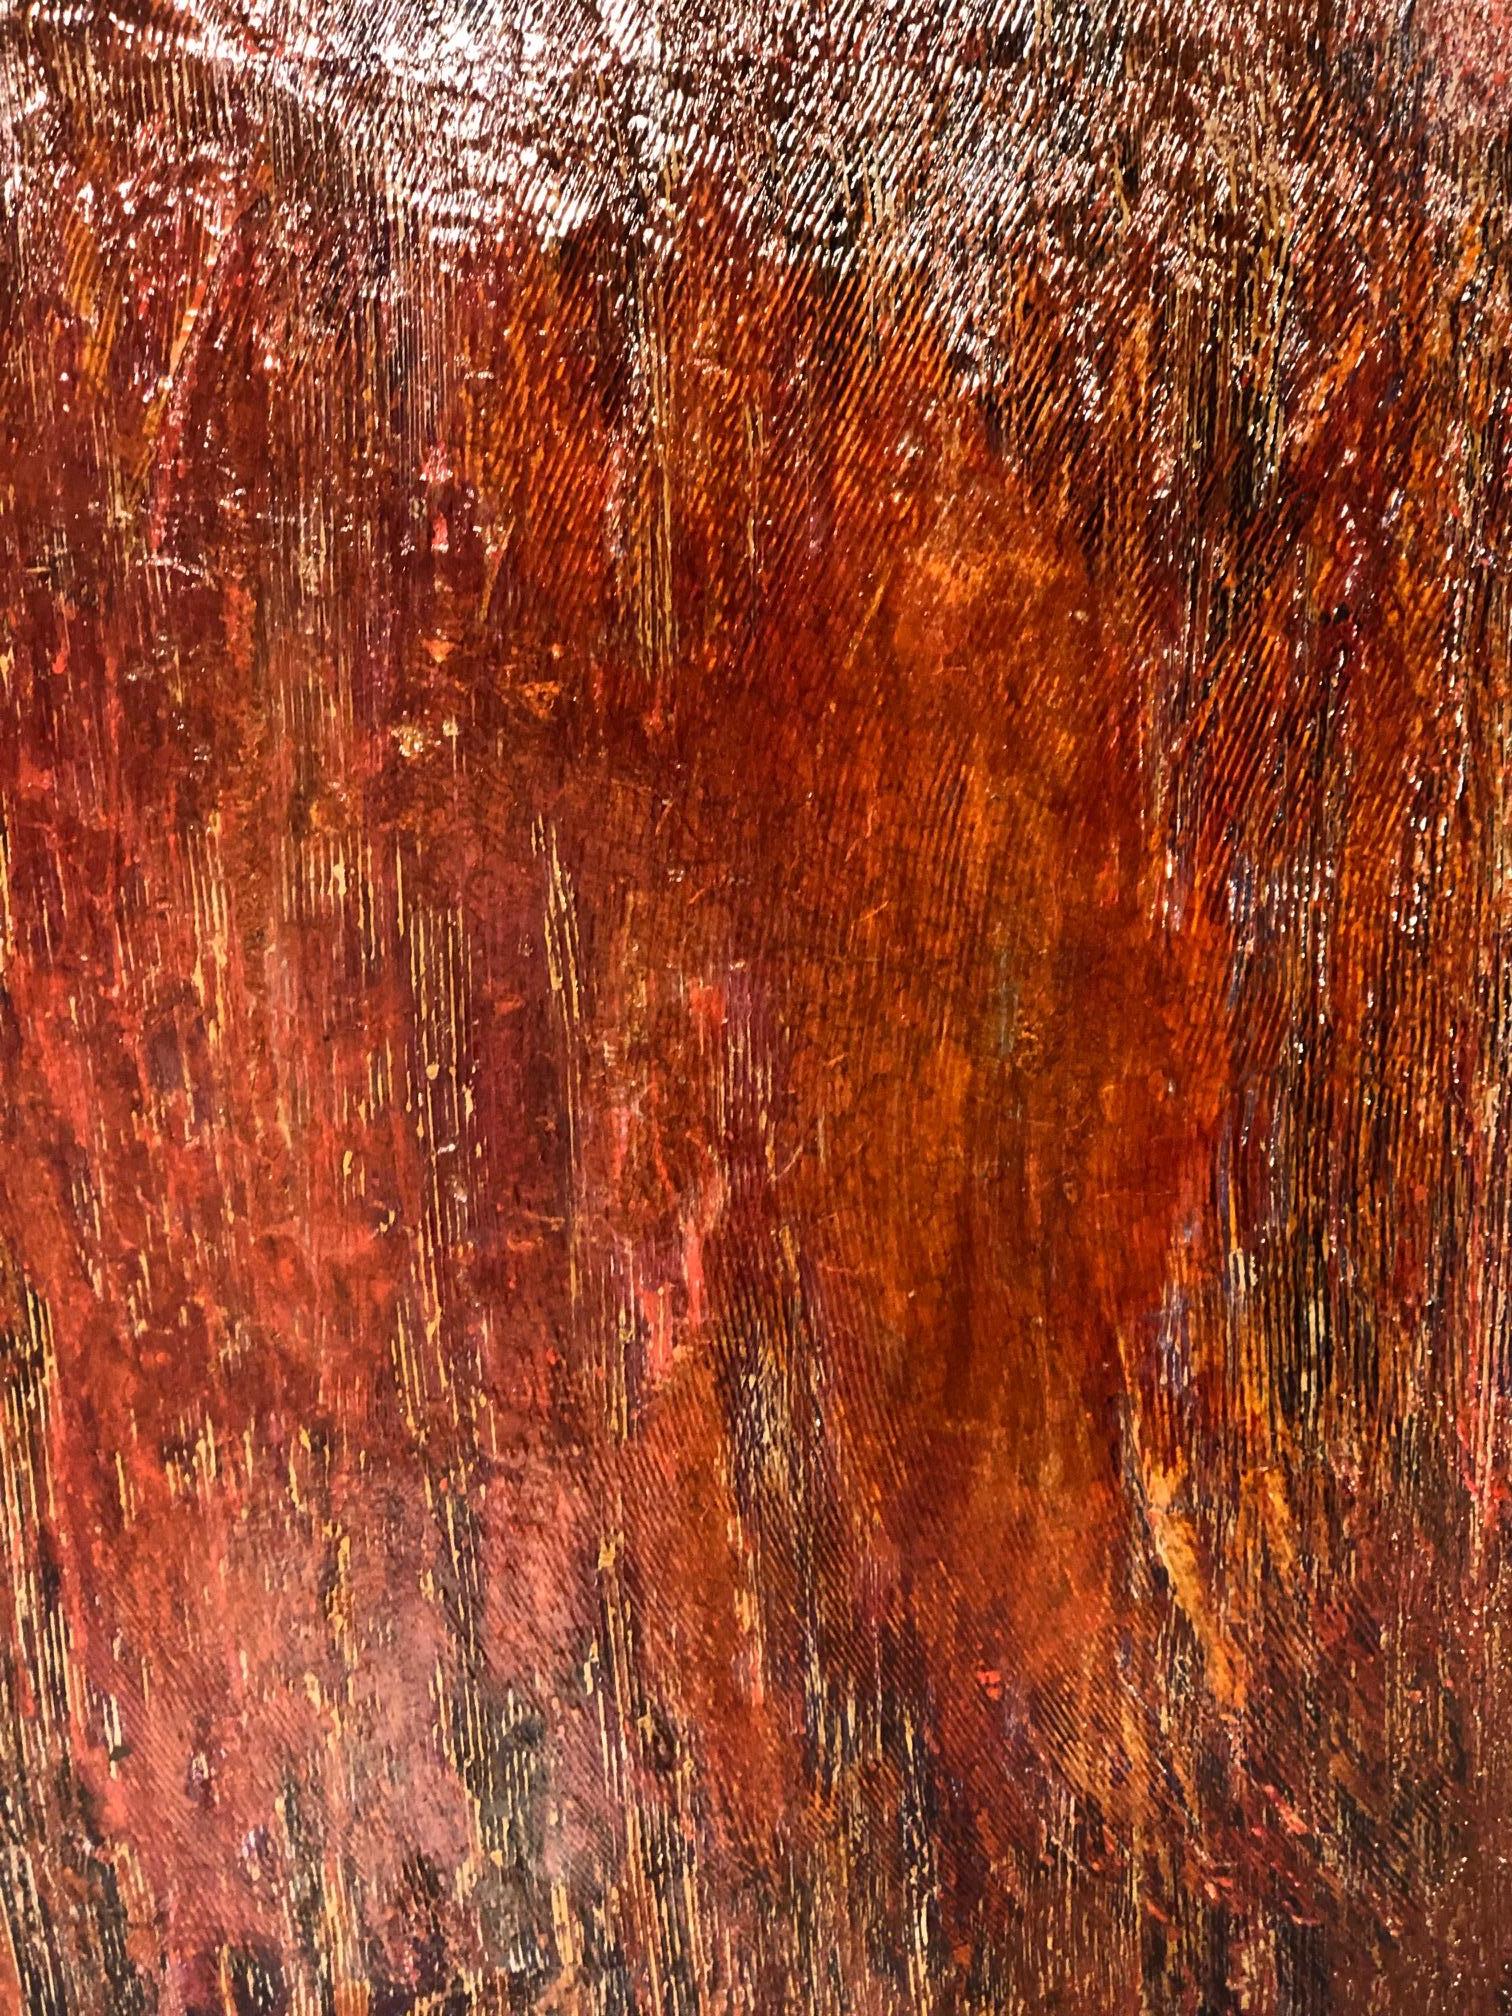 Augustus Cross Abstract Painting - "Untitled - red lacquer"  Textured red lacquered painting for grid or solo